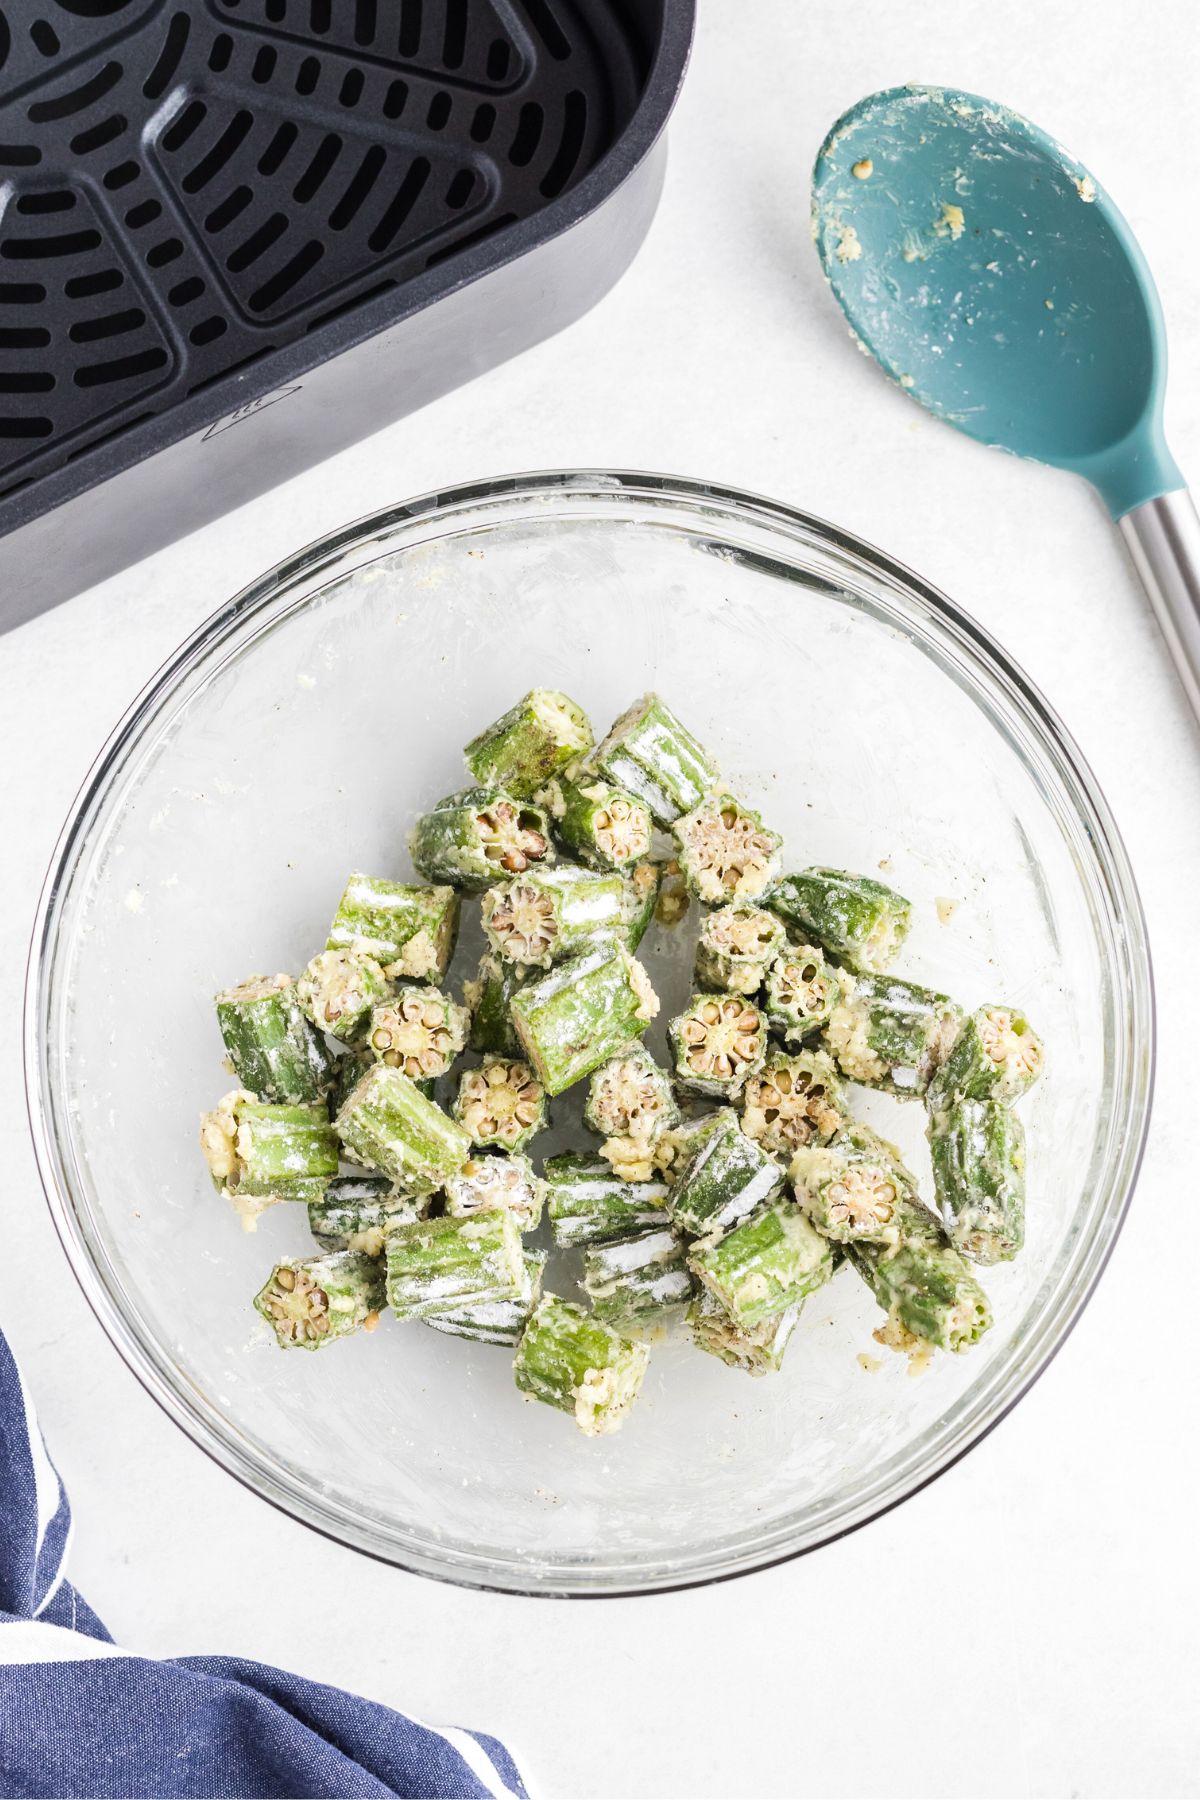 Fresh okra cut into pieces, tossed in a clear glass bowl with cornstarch, garlic, and seasonings.